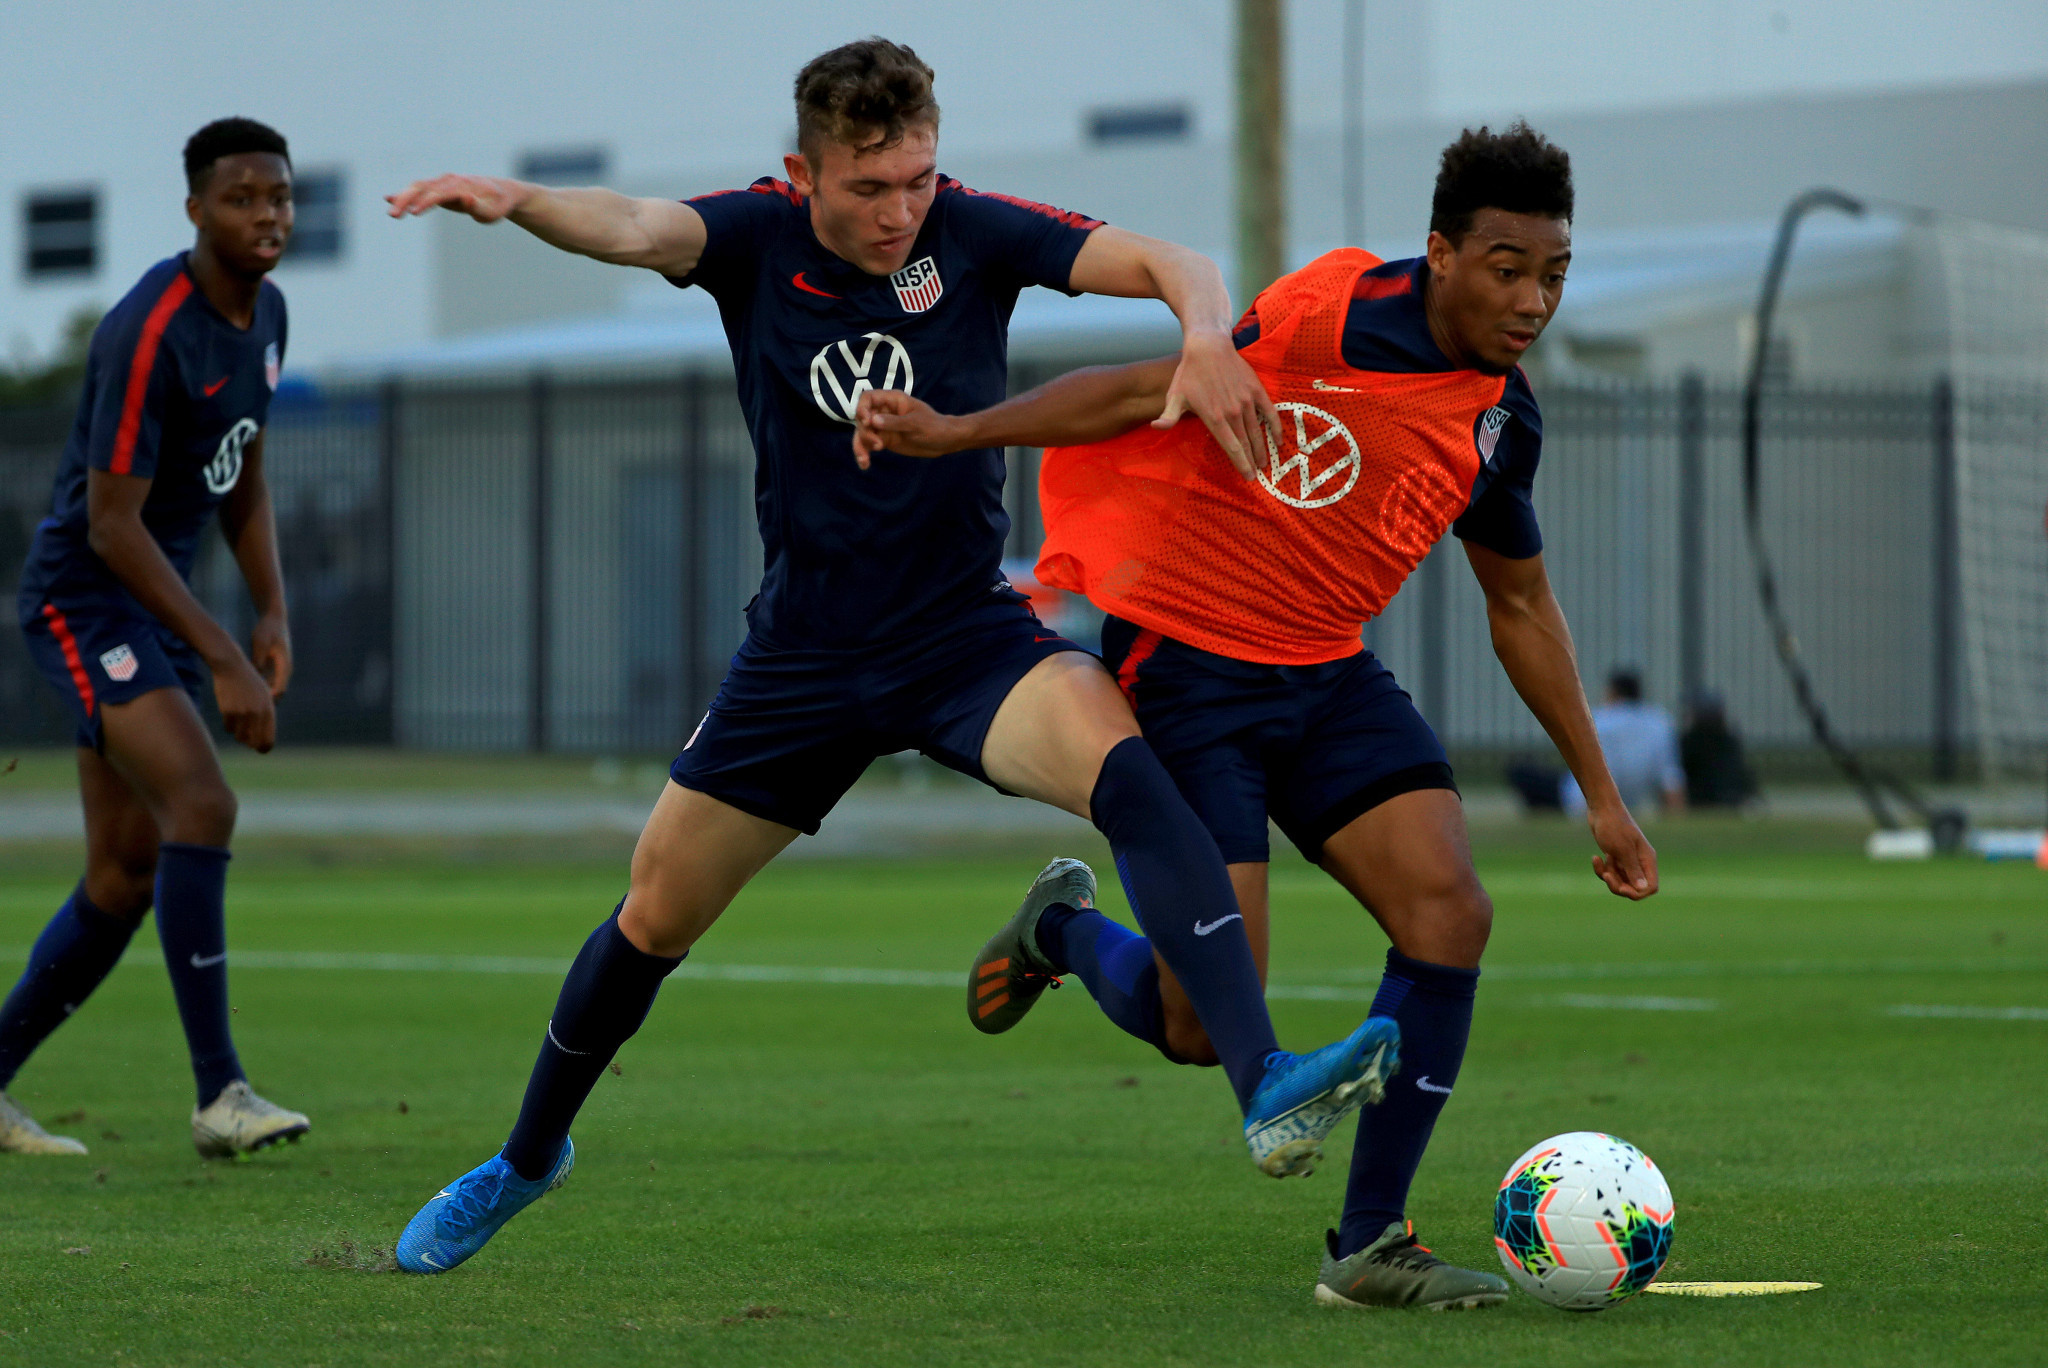 US Soccer include under-23 players at training camp to prepare for Tokyo 2020